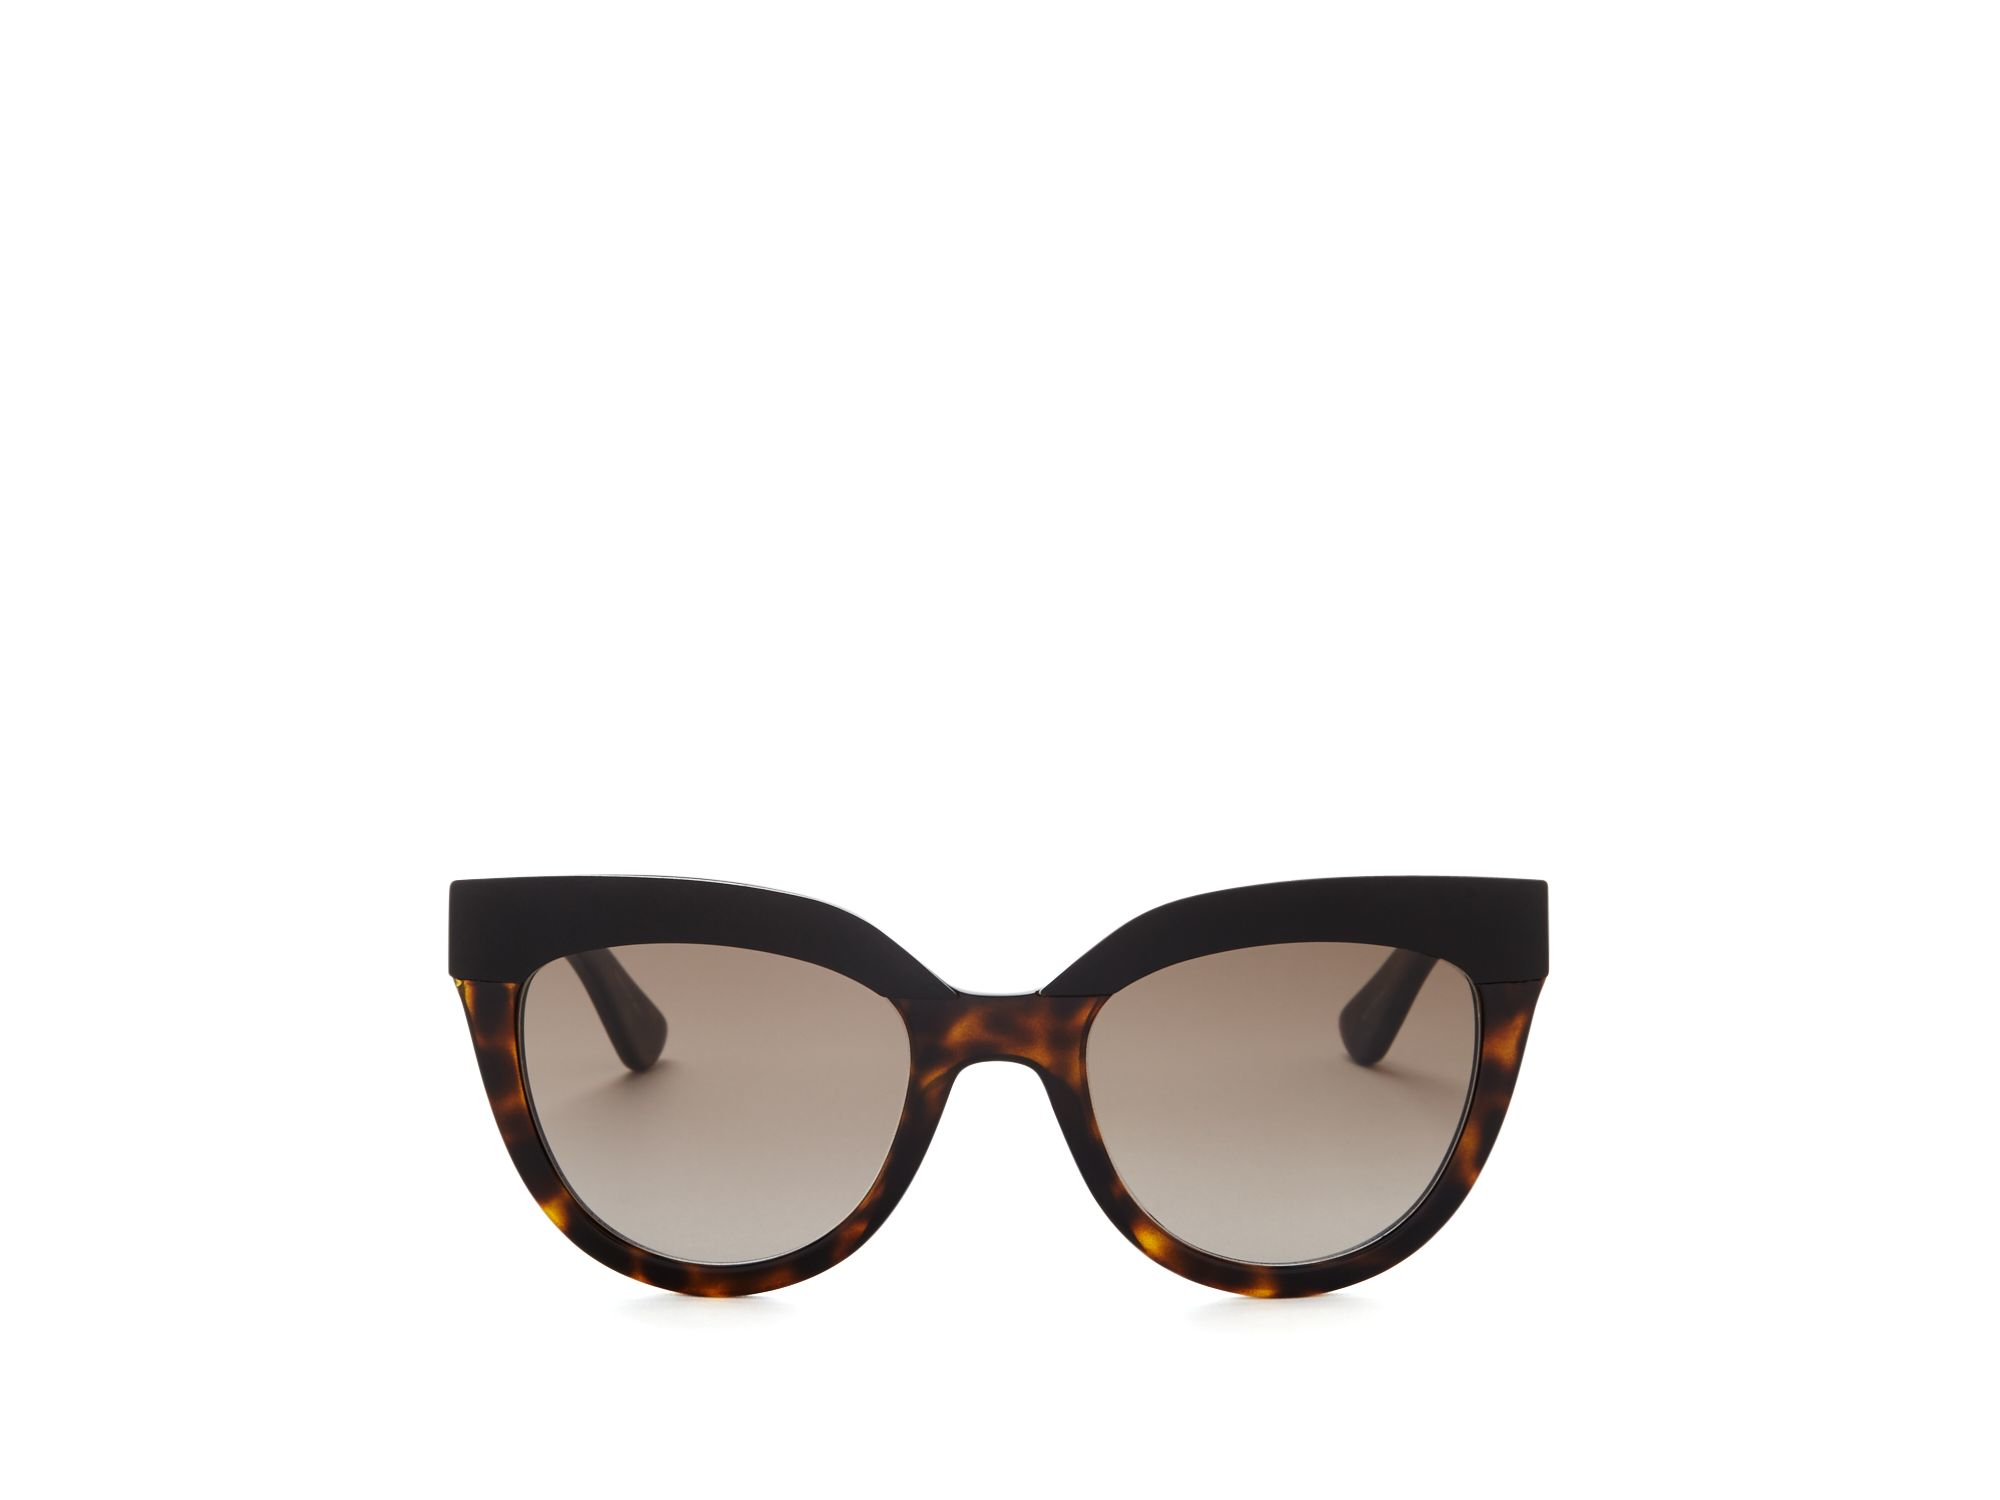 Dior Soft 1 Square Cat Eye Sunglasses, 51mm in Brown | Lyst